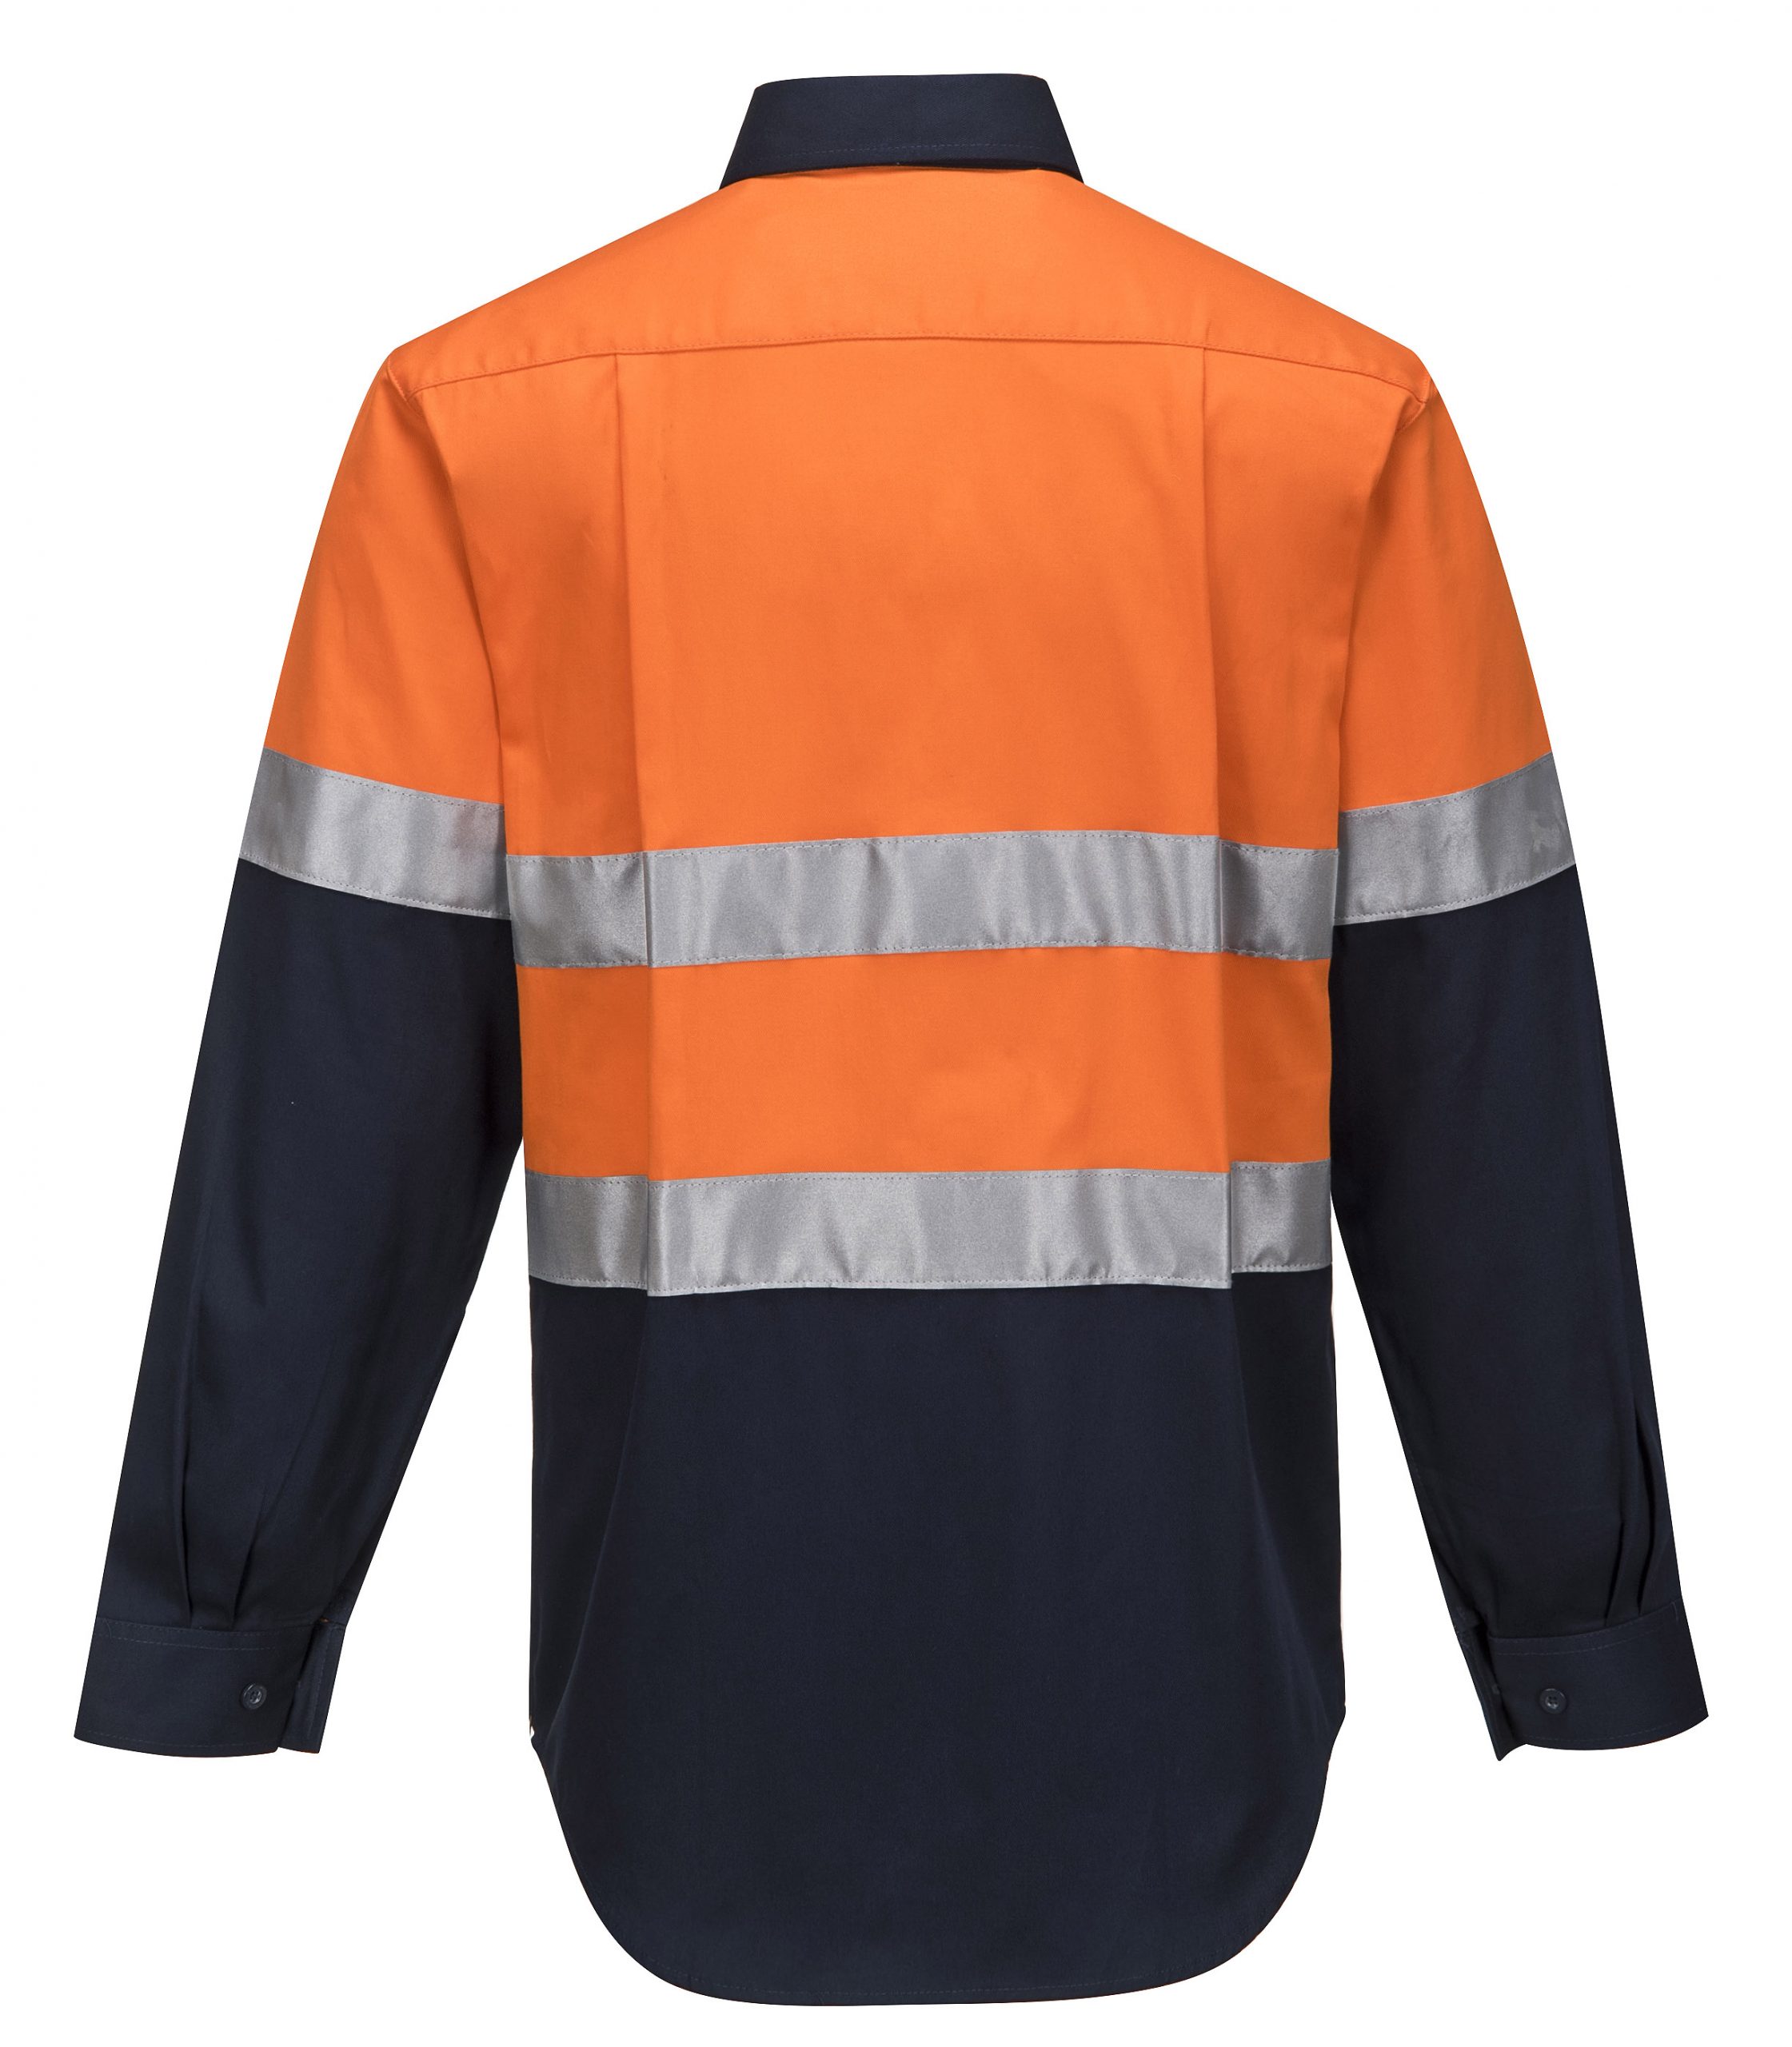 MA101 - Hi-Vis Two Tone Regular Weight Long Sleeve Shirt with Tape O2